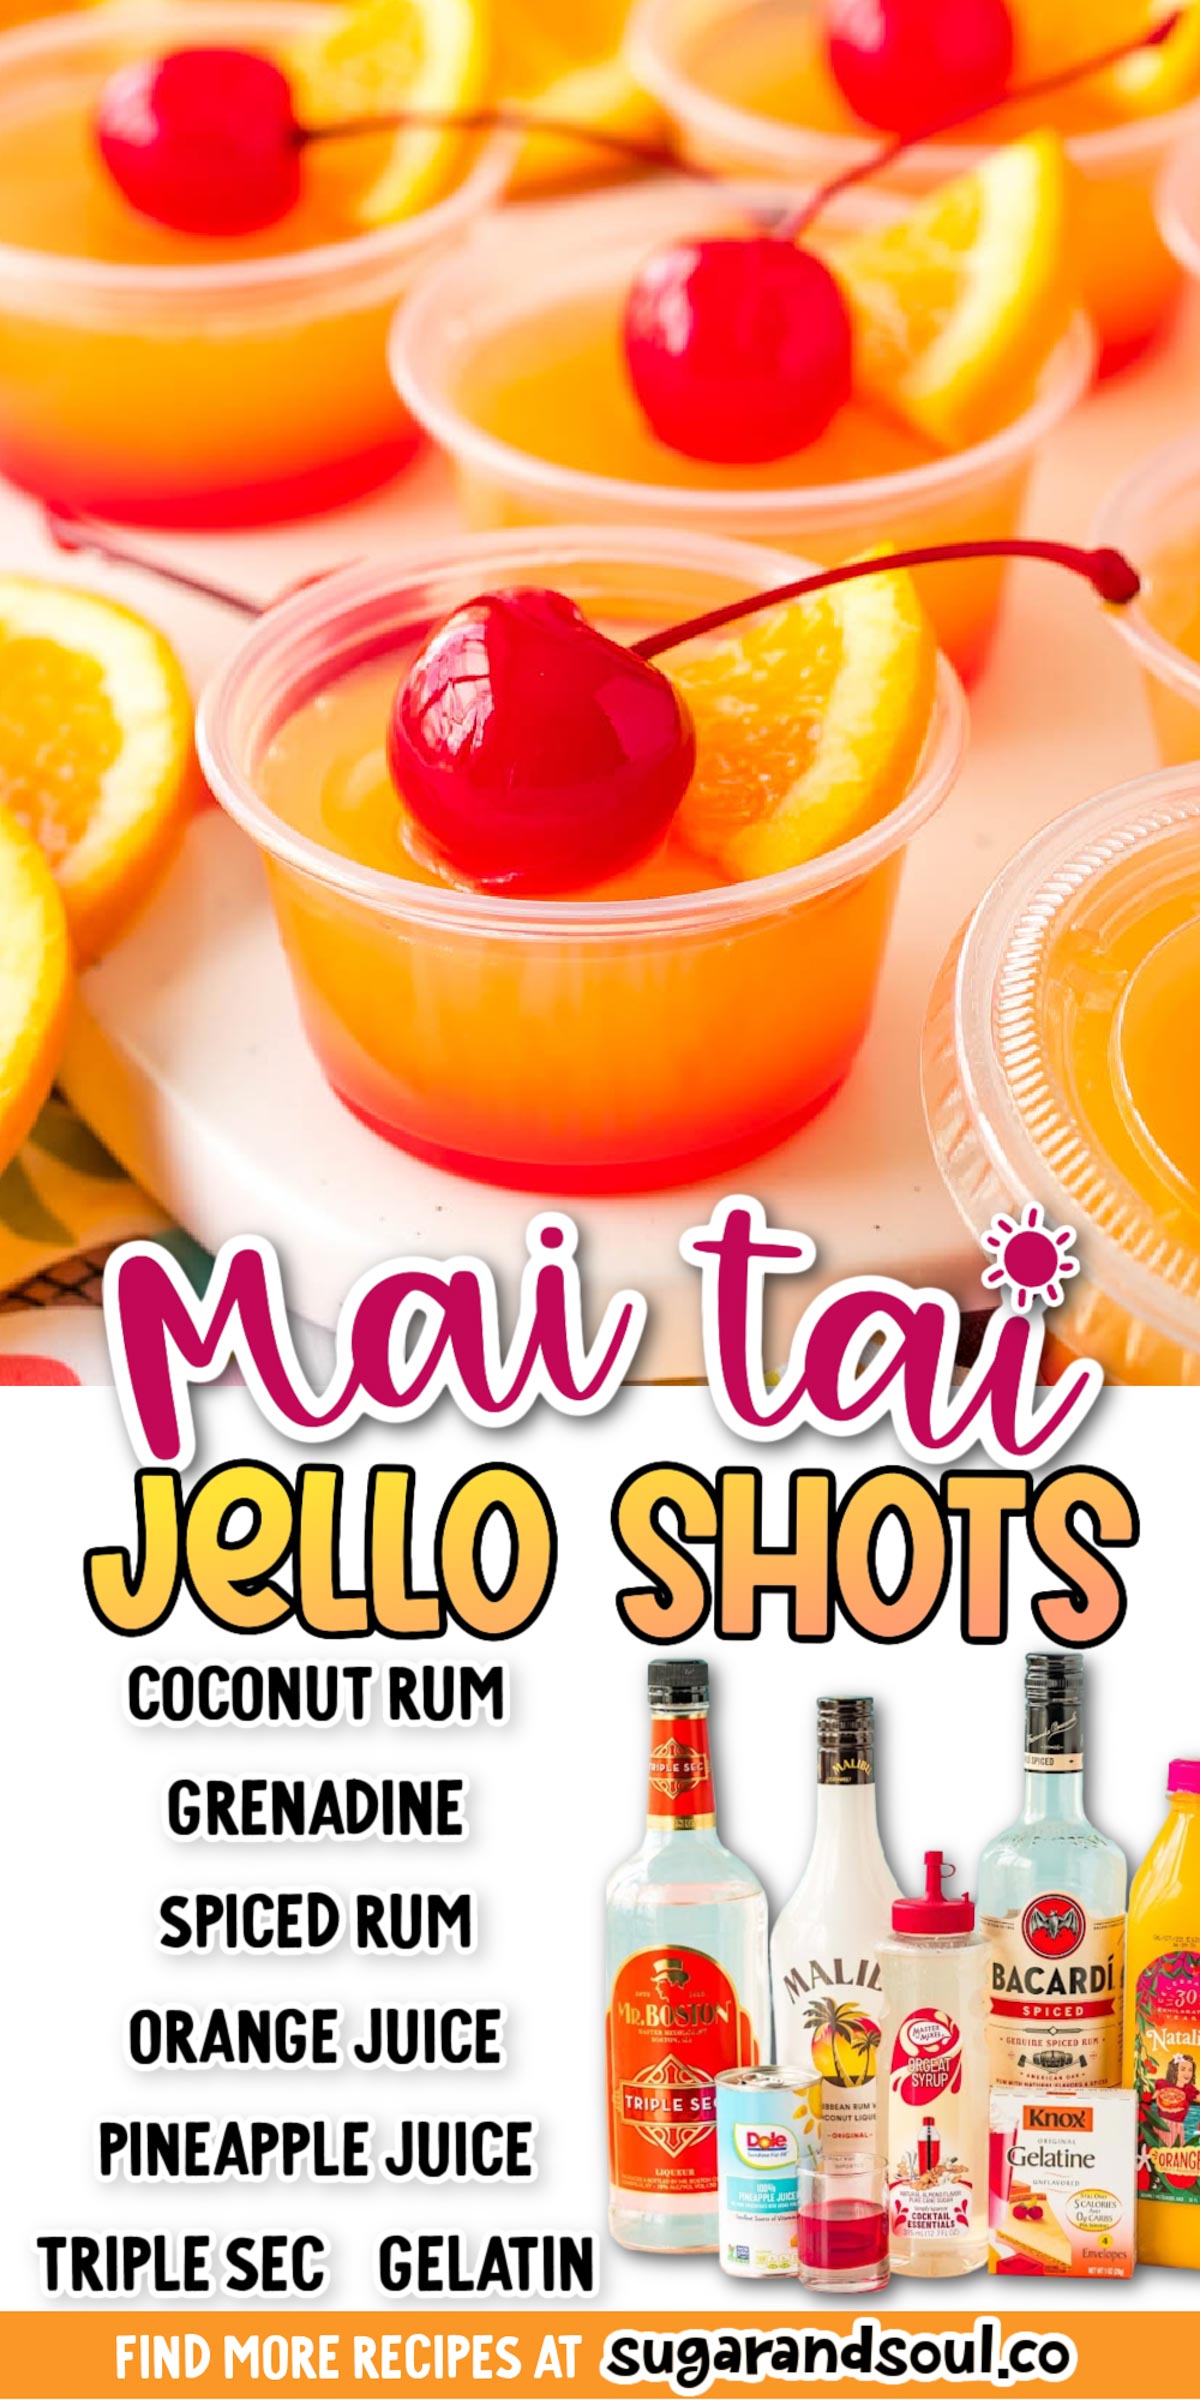 Mai Tai Jello Shots takes all the classic Mai Tai ingredients and turns them into a fun, tasty Jello shot that's perfect for your next party! Only 10 minutes of prep time is needed to make over a dozen! via @sugarandsoulco